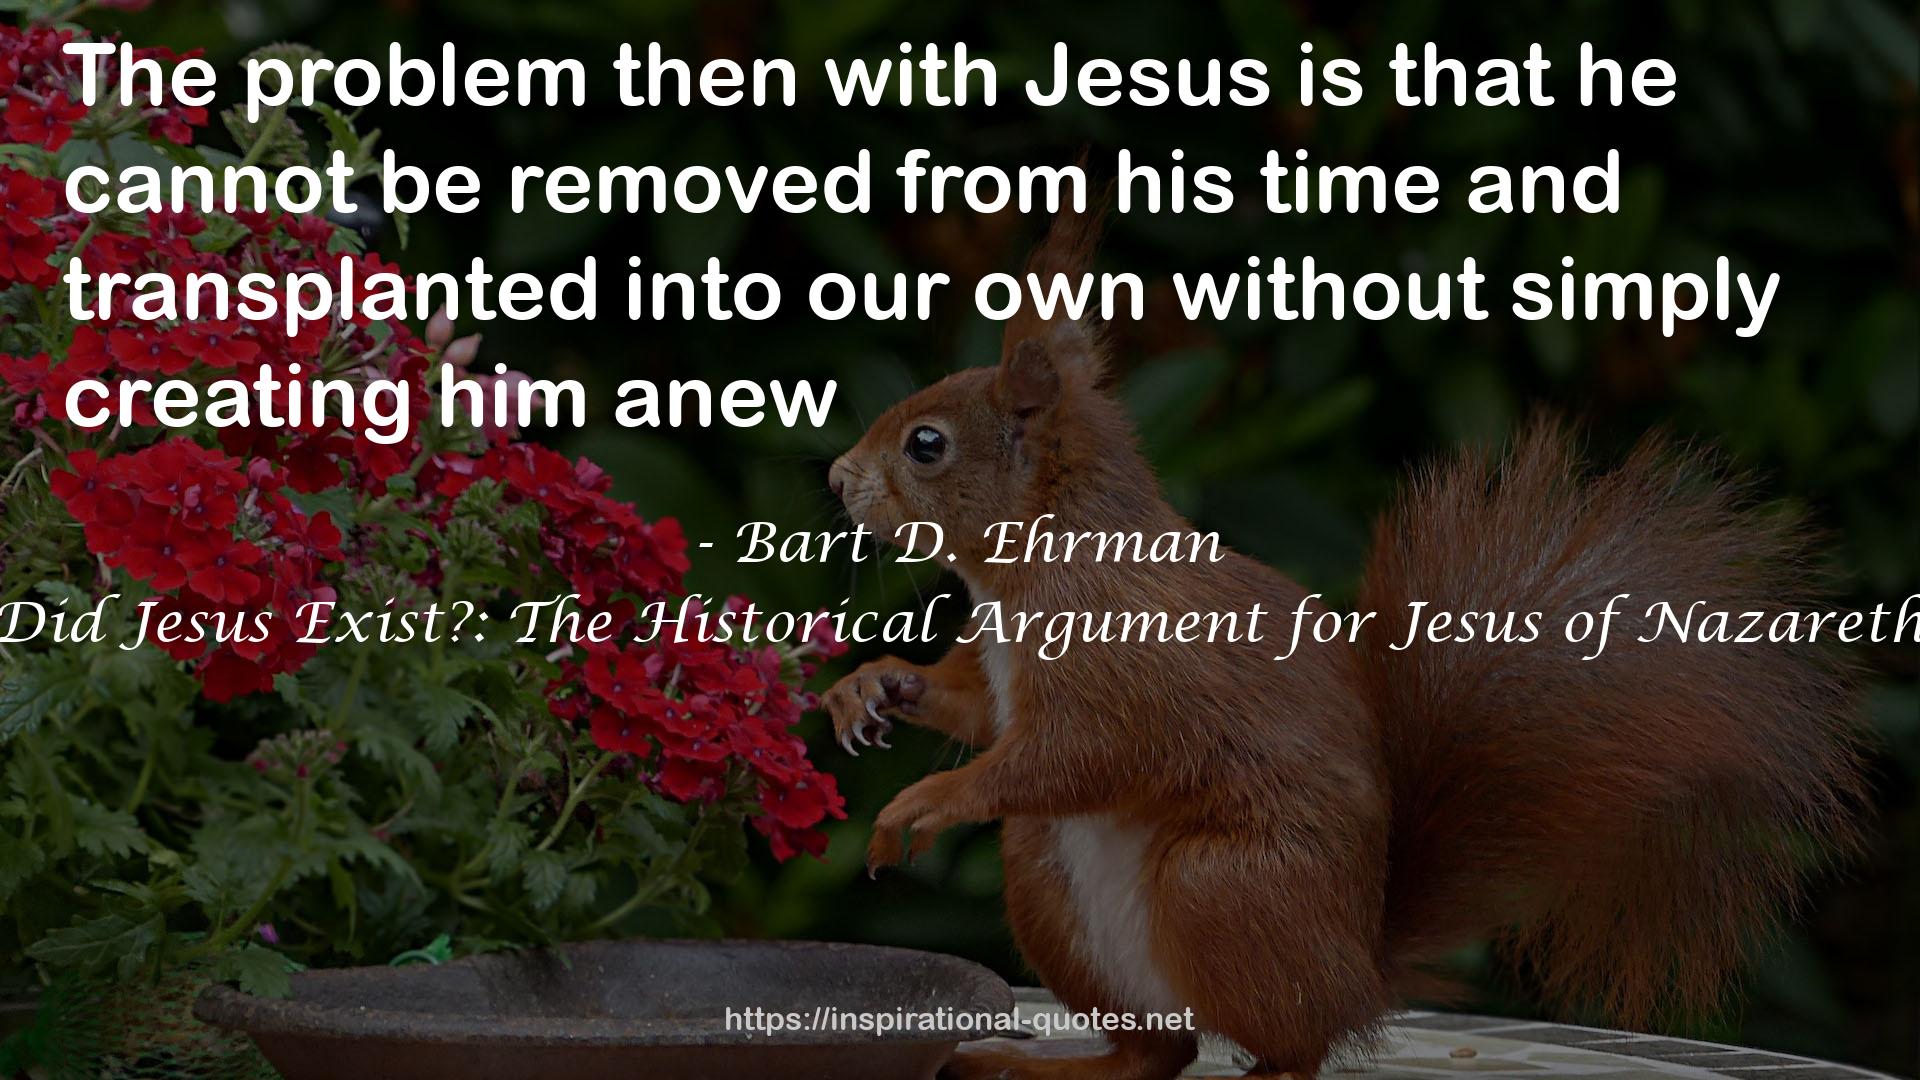 Did Jesus Exist?: The Historical Argument for Jesus of Nazareth QUOTES